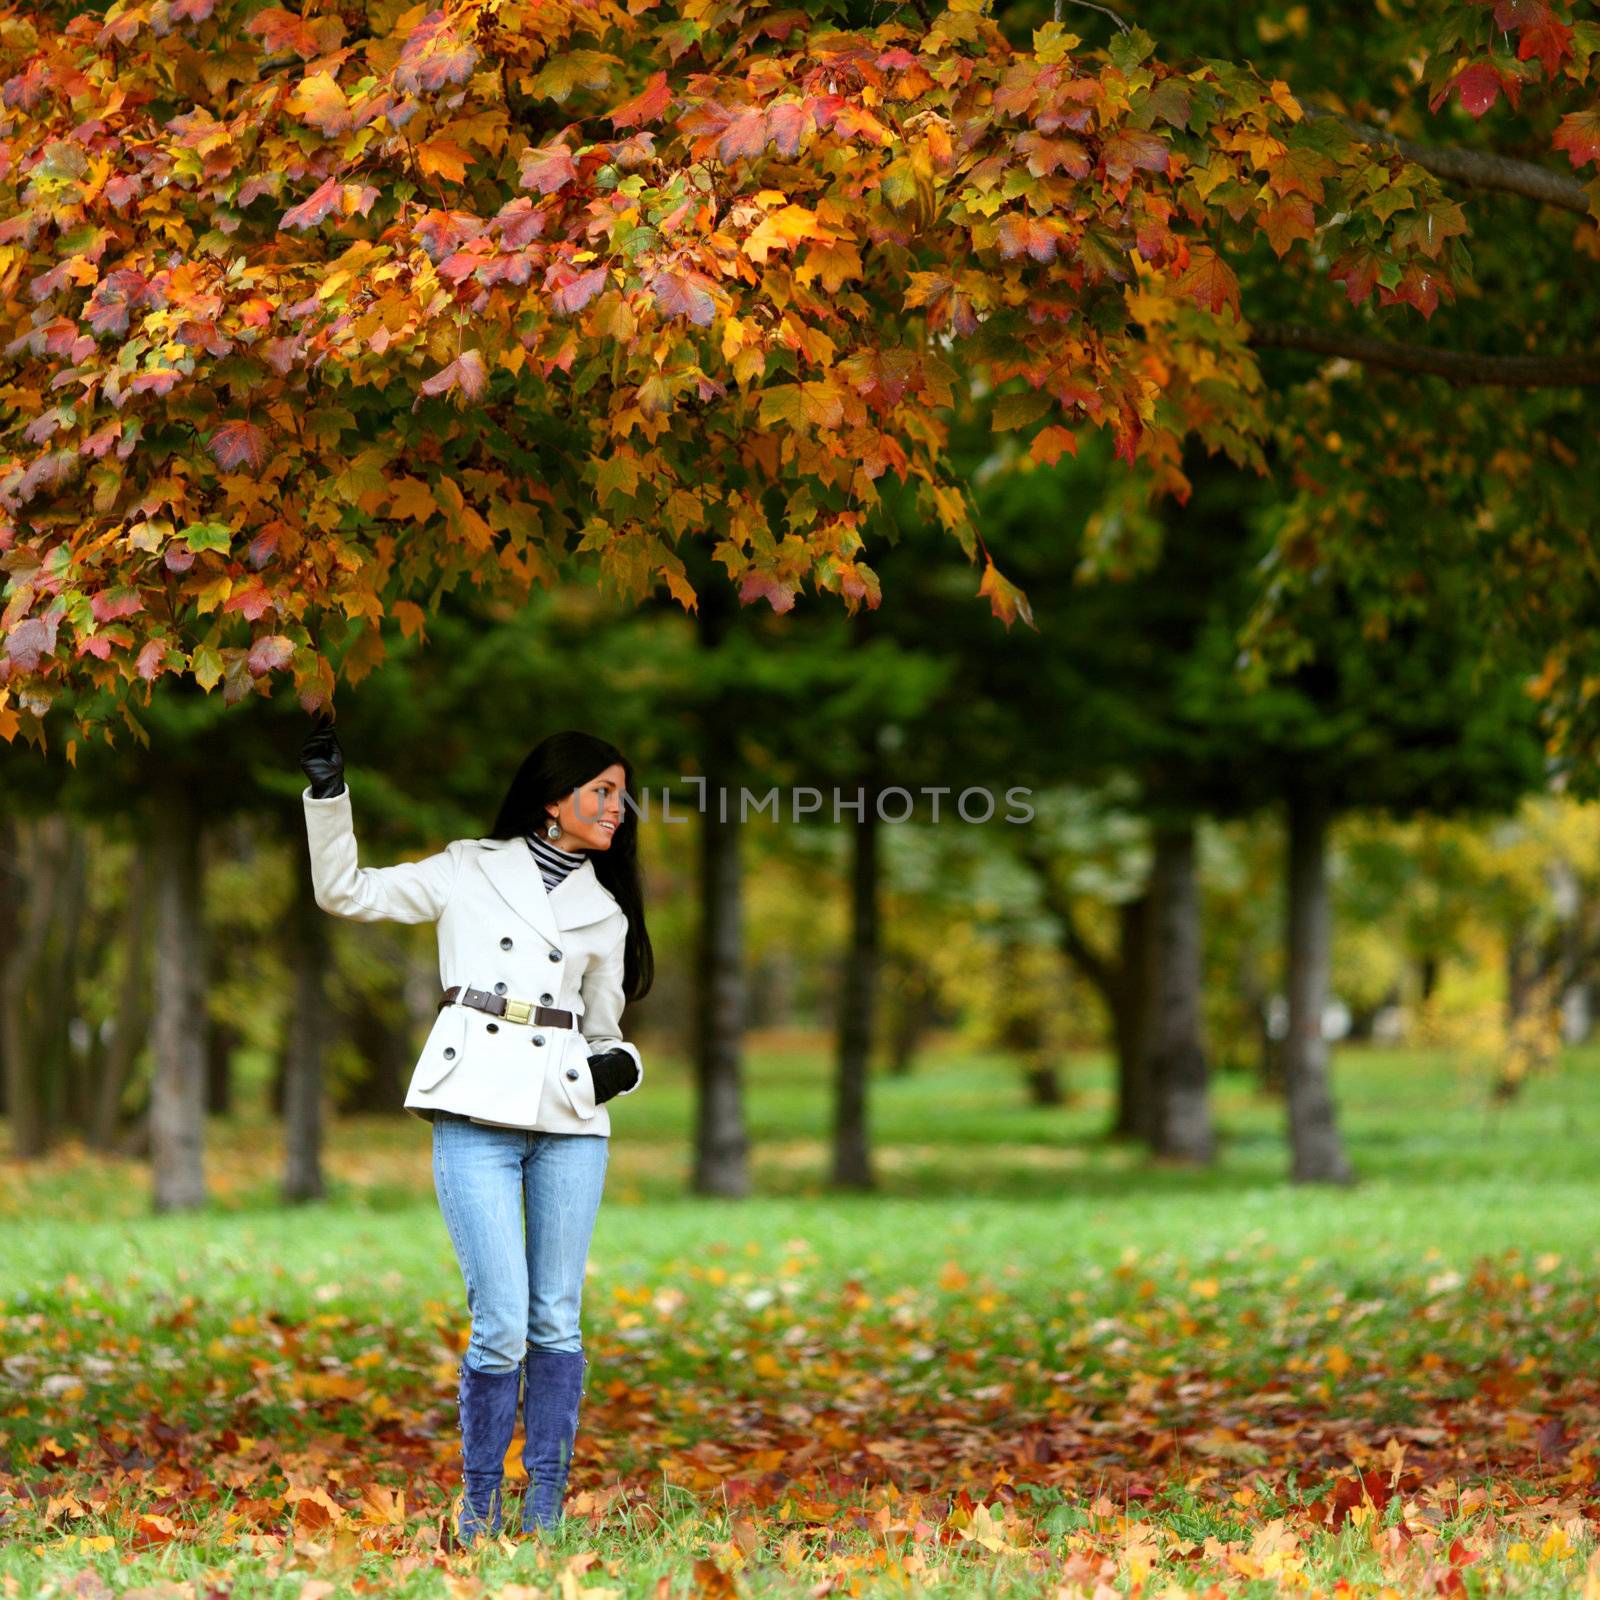  woman in yellow autumn park